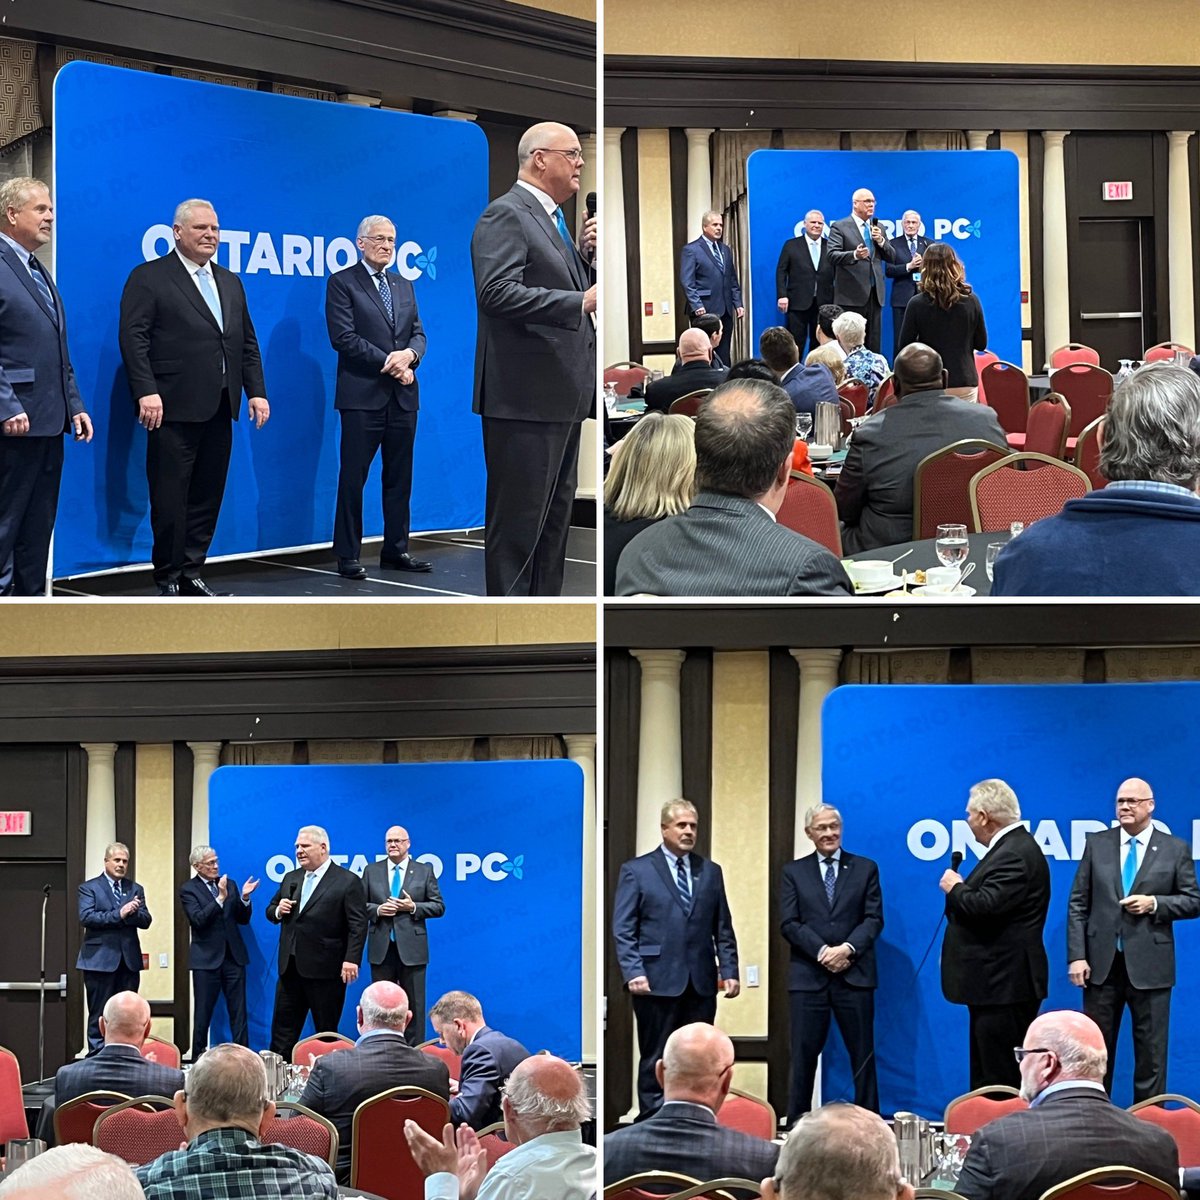 What an honour to share the stage with Premier @fordnation, Minister @RobFlackEML and MPP @erniehardeman in #London today. Humbled by the offers of support from many of the people who attended and looking forward to having them out to canvass in #LambtonKentMiddlesex.